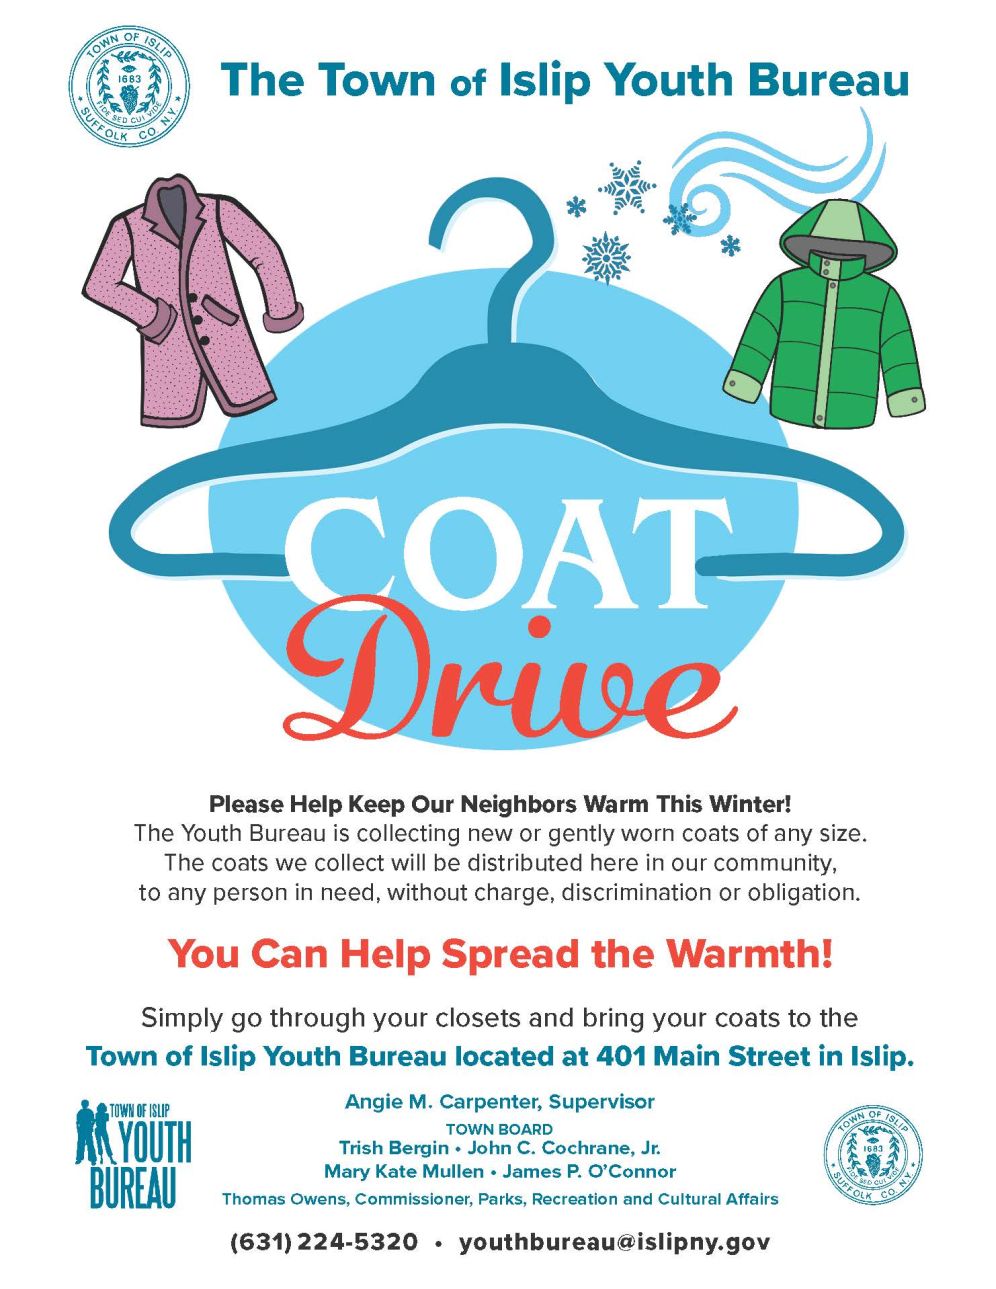 Spread the Warmth with the Town of Islip Coat Drive